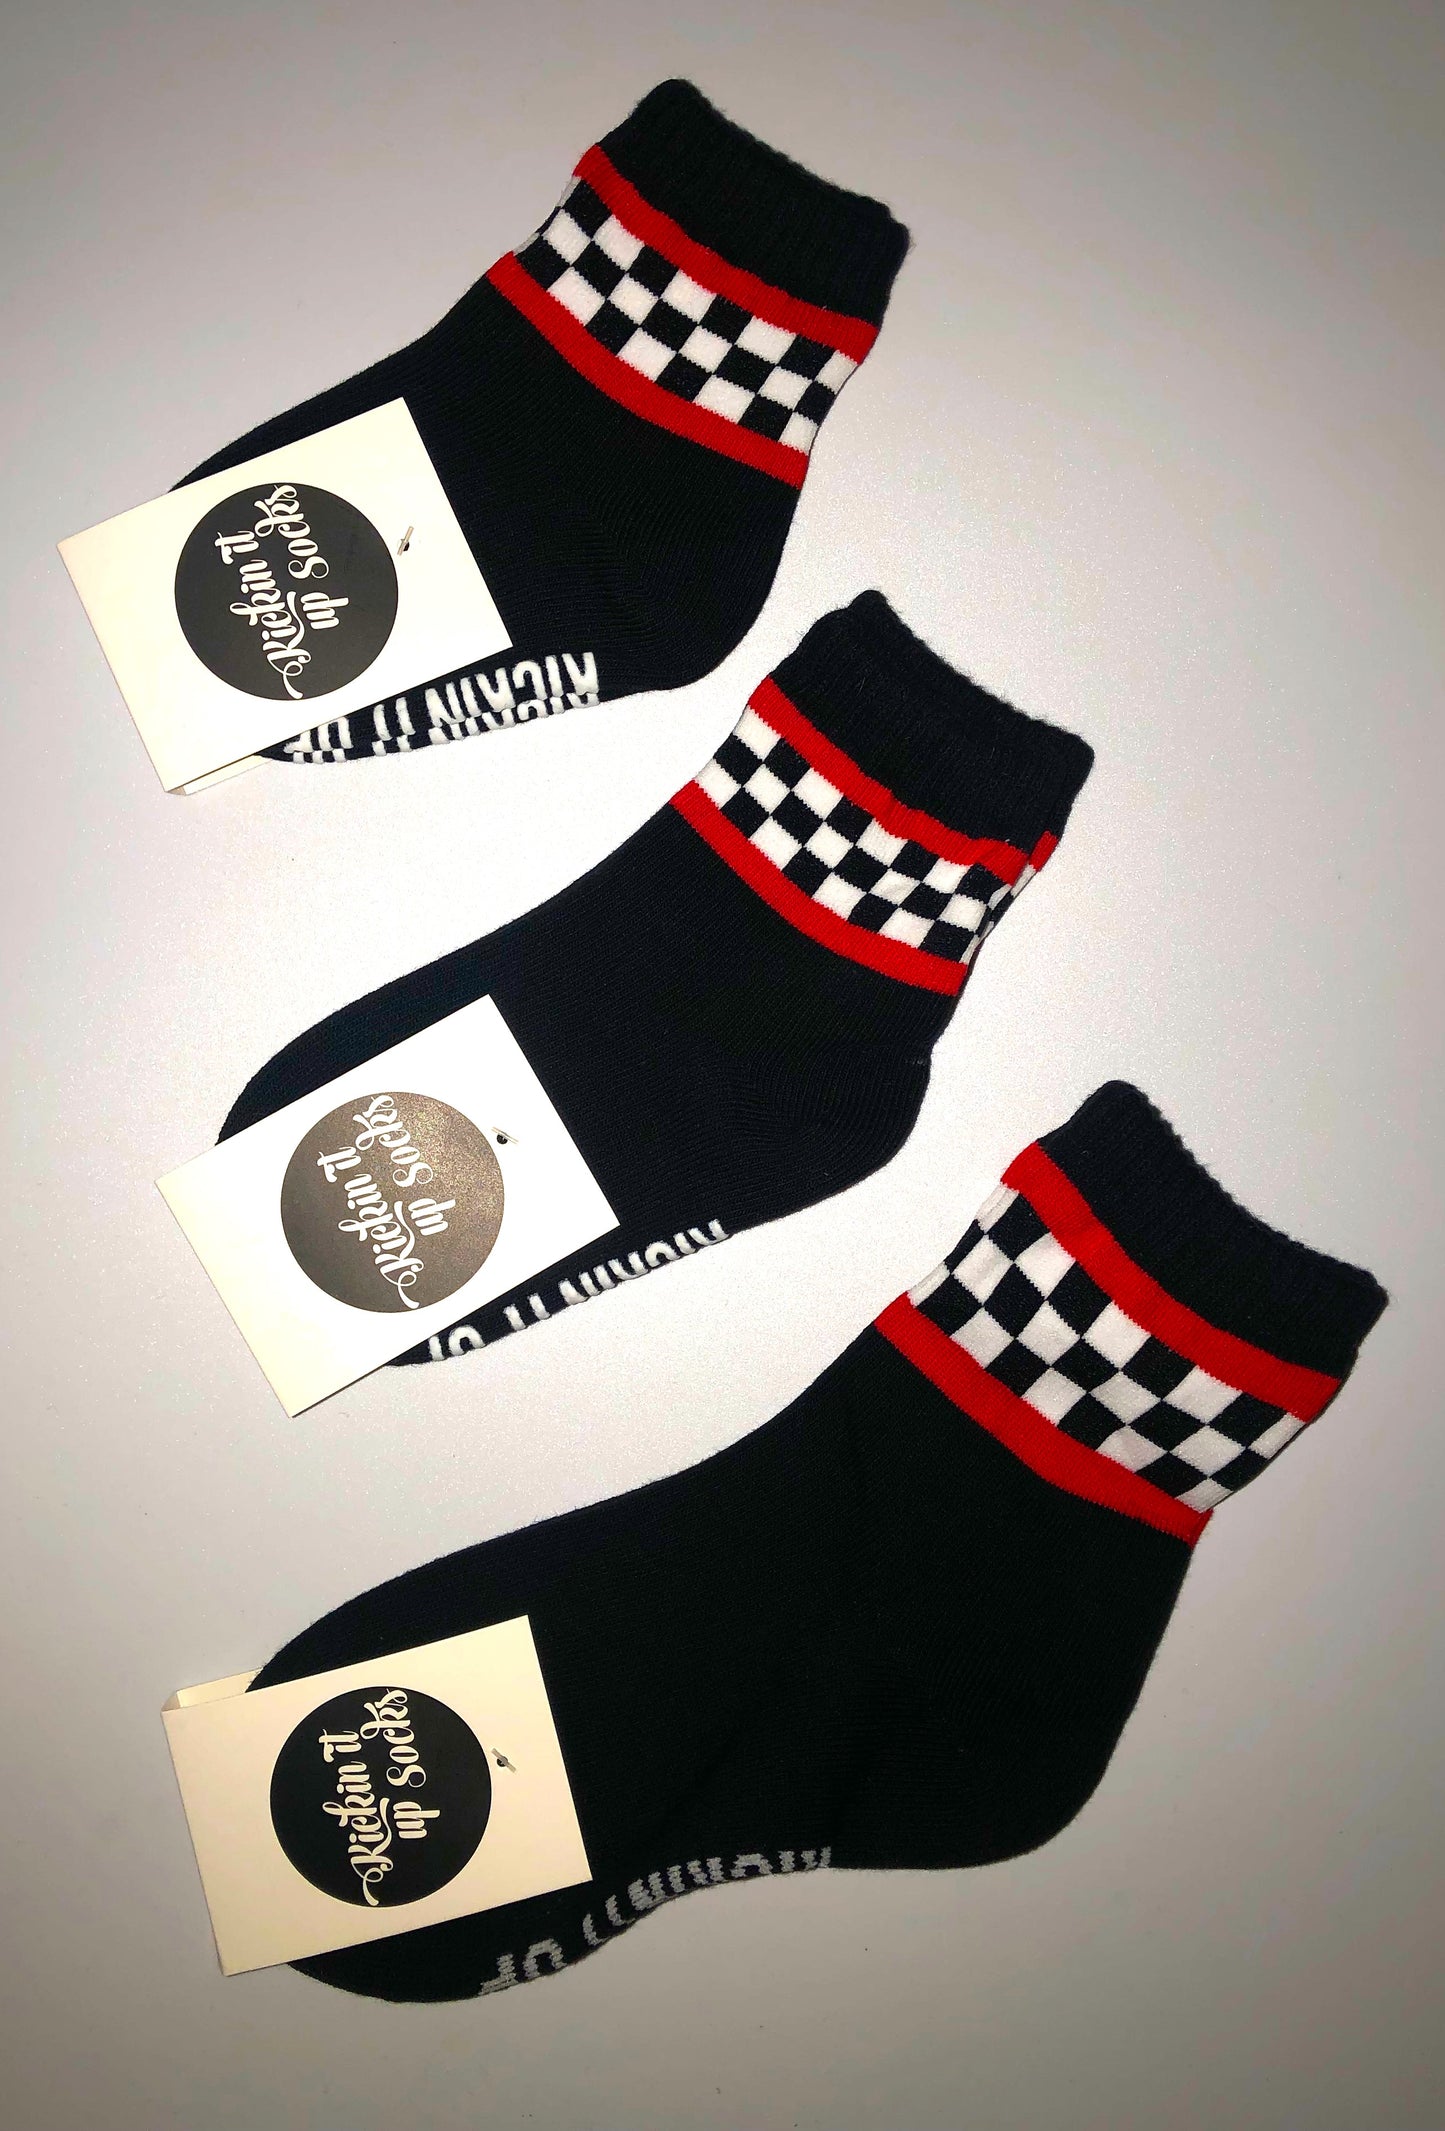 Toddler and Youth Black Socks with Checkered Pattern and Red Stripes